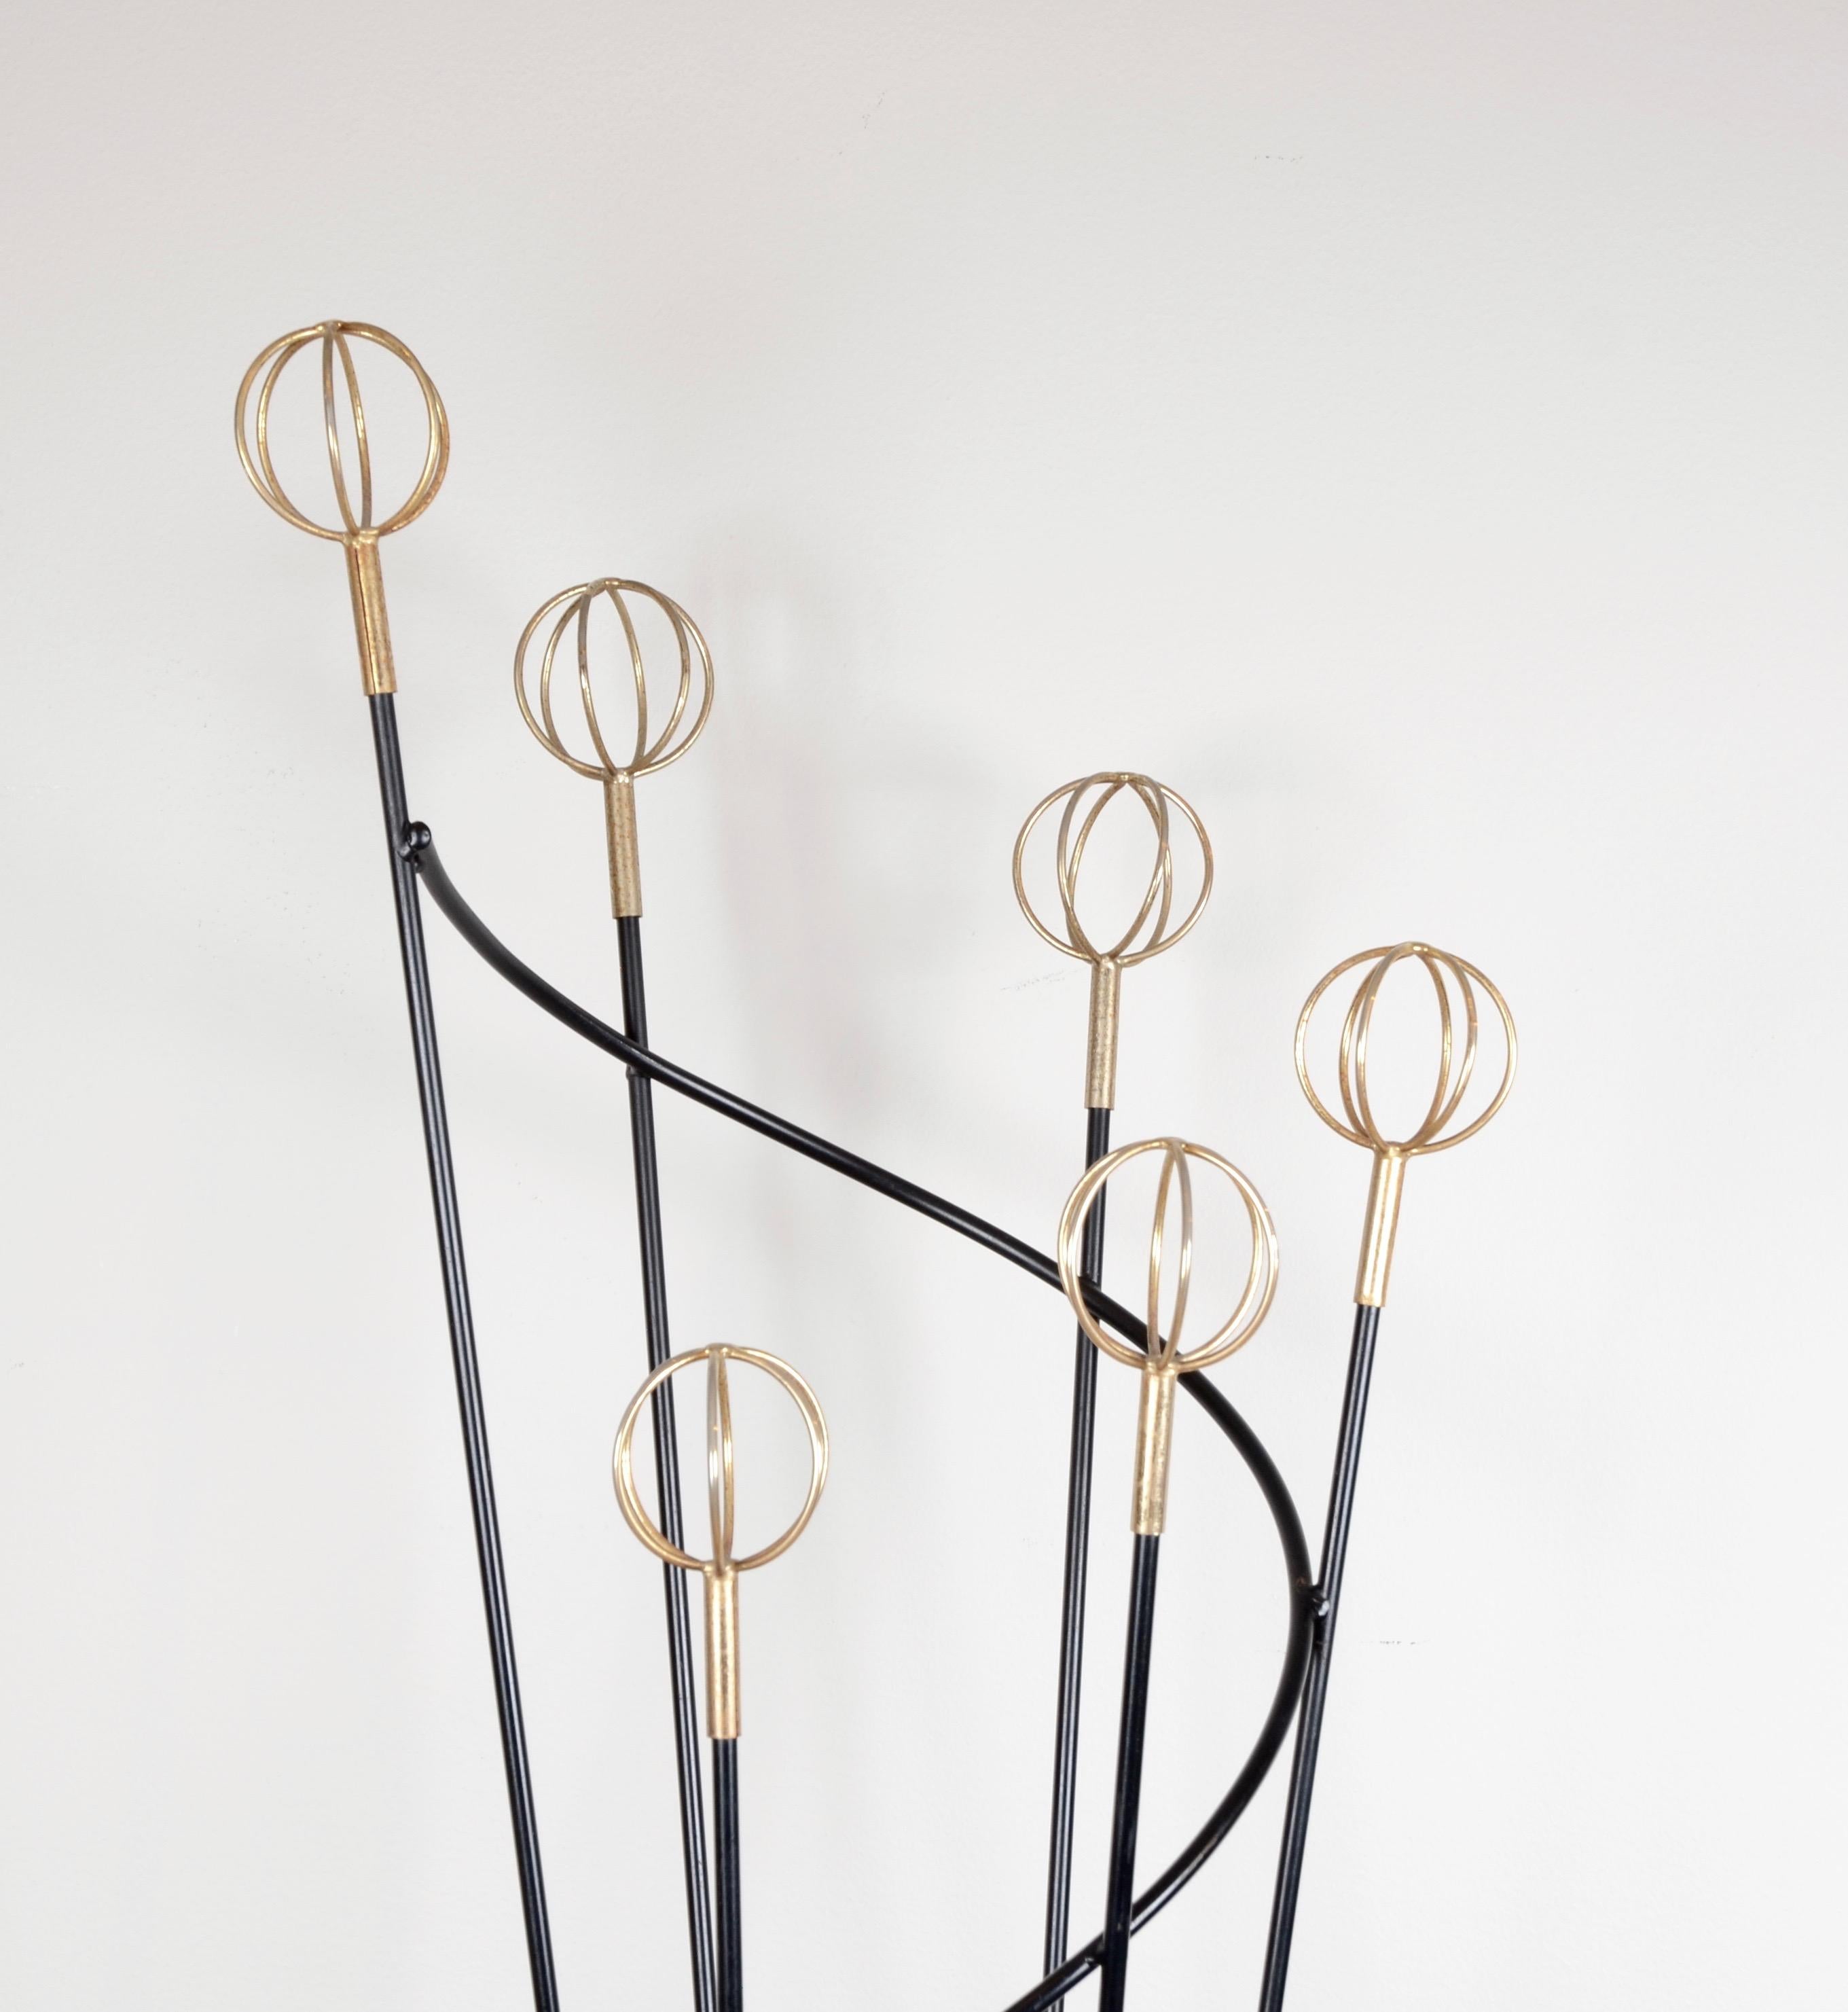 Italian coat hanger in lacquered metal and details in brass, designed by Roger Feraud. Italian, mid-1900s.